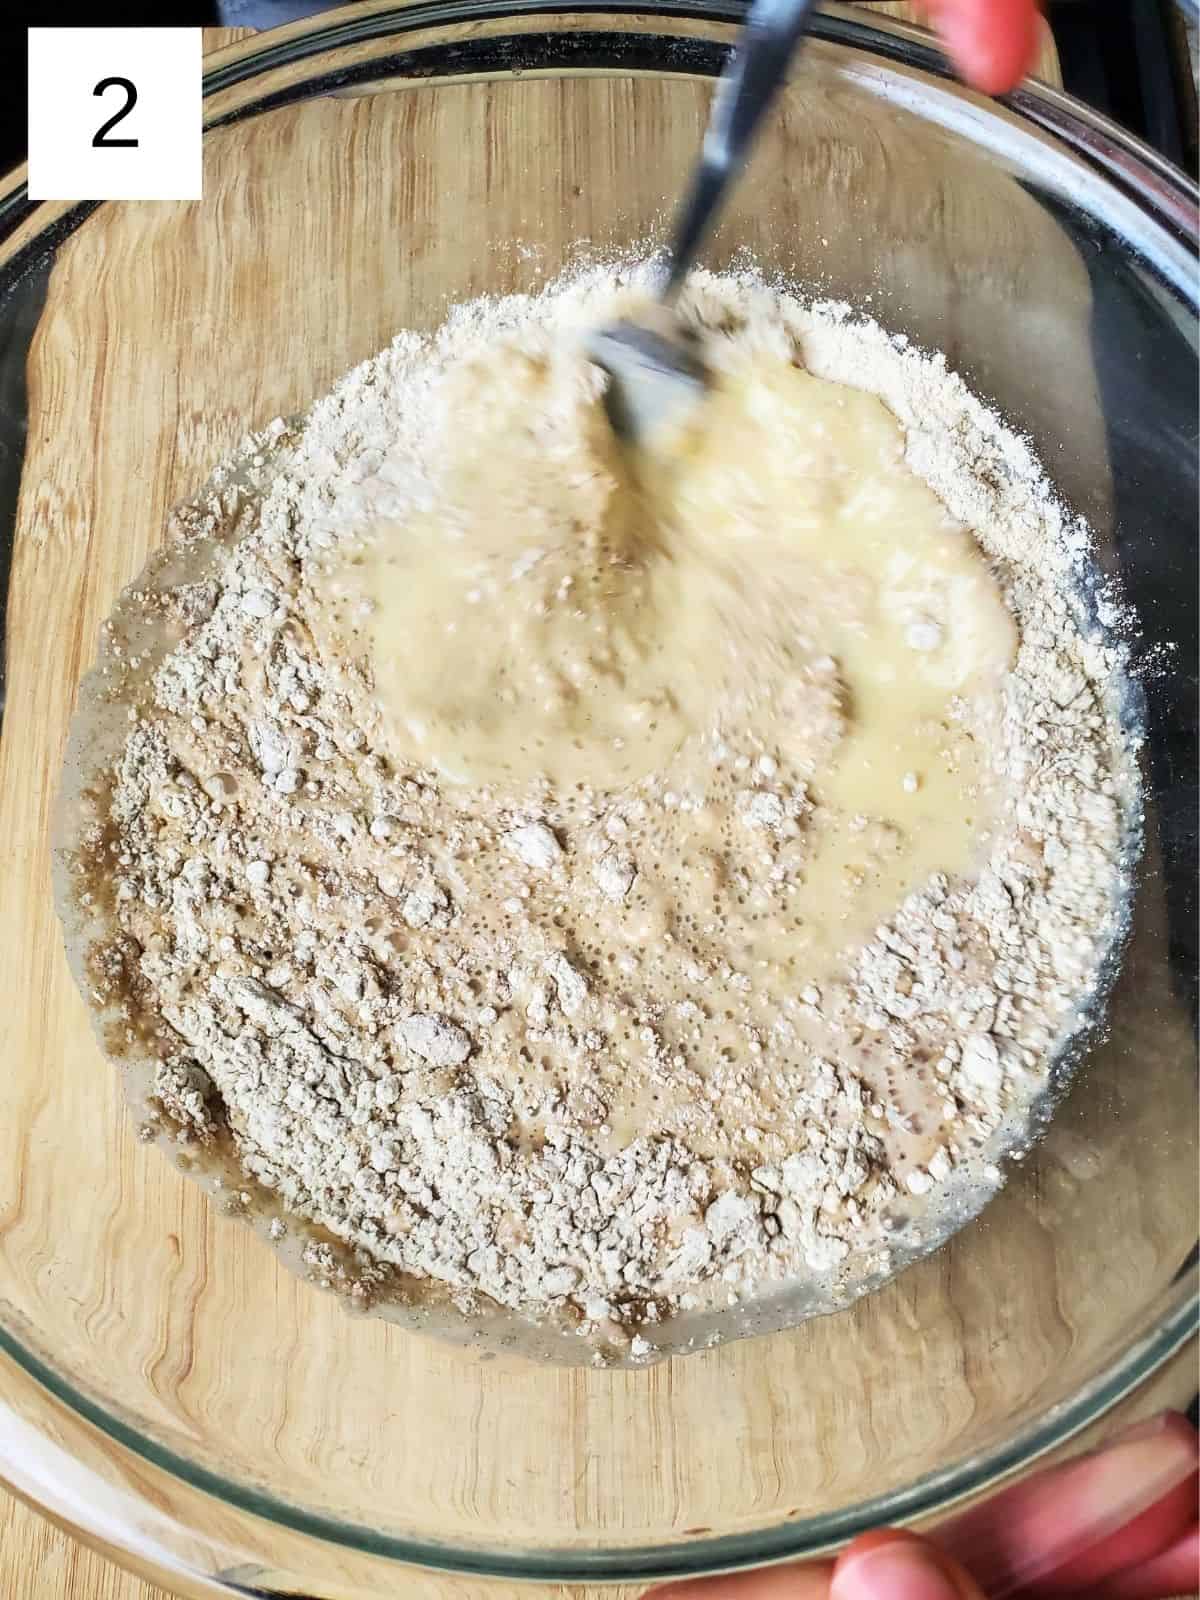 blending the mixture of chestnut flour, milk, salt, and eggs in a large mixing bowl.